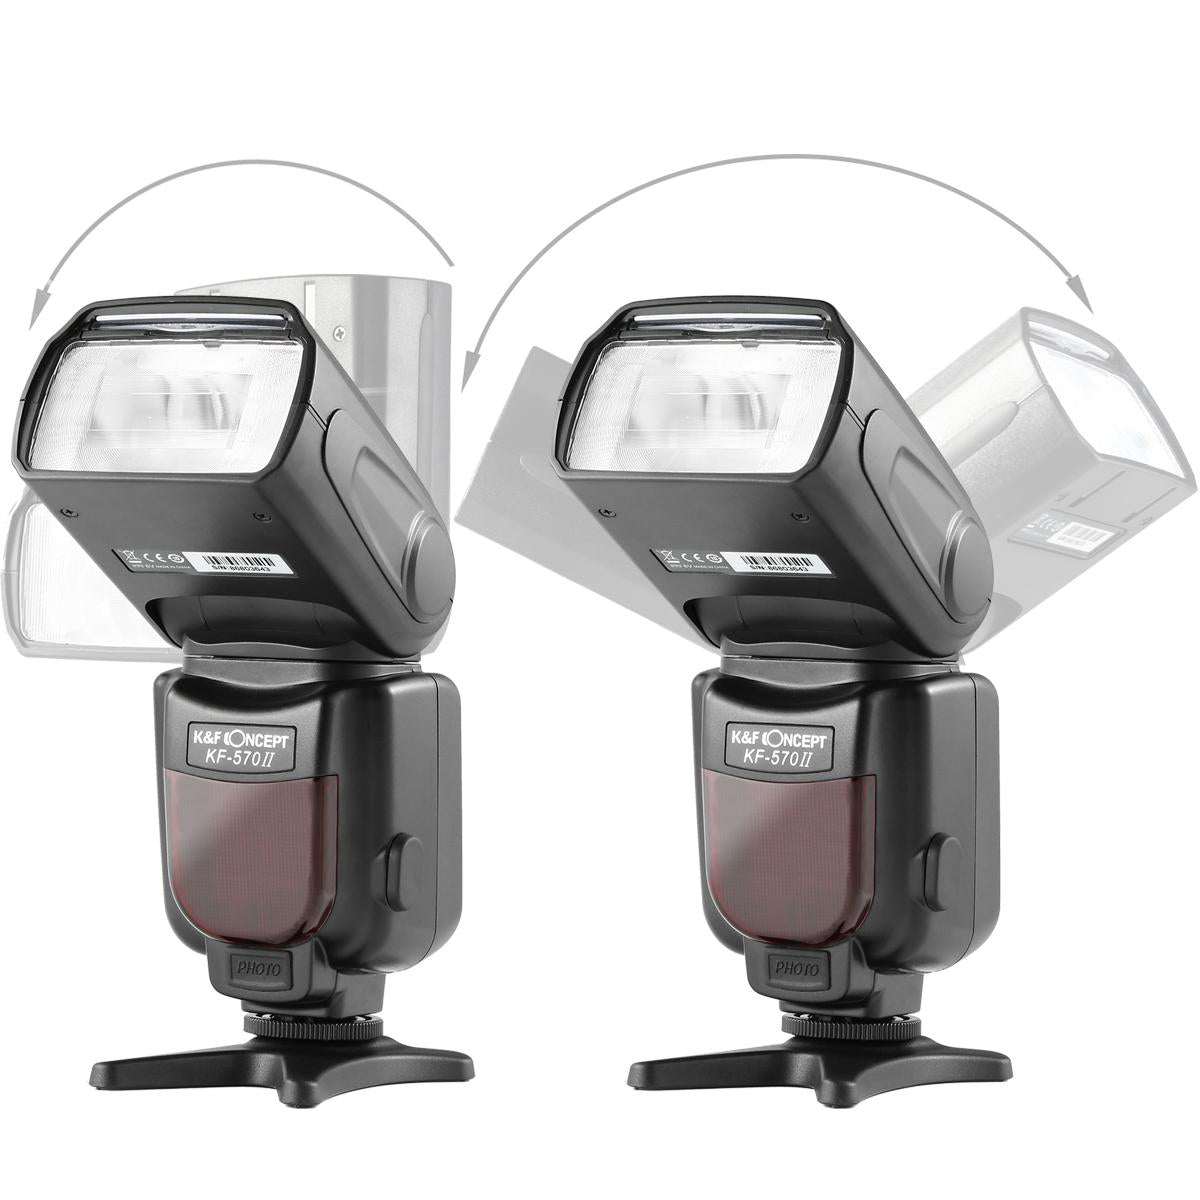 K&F Concept570 II Flash for Canon Nikon with Single-Contact Shoe Mount